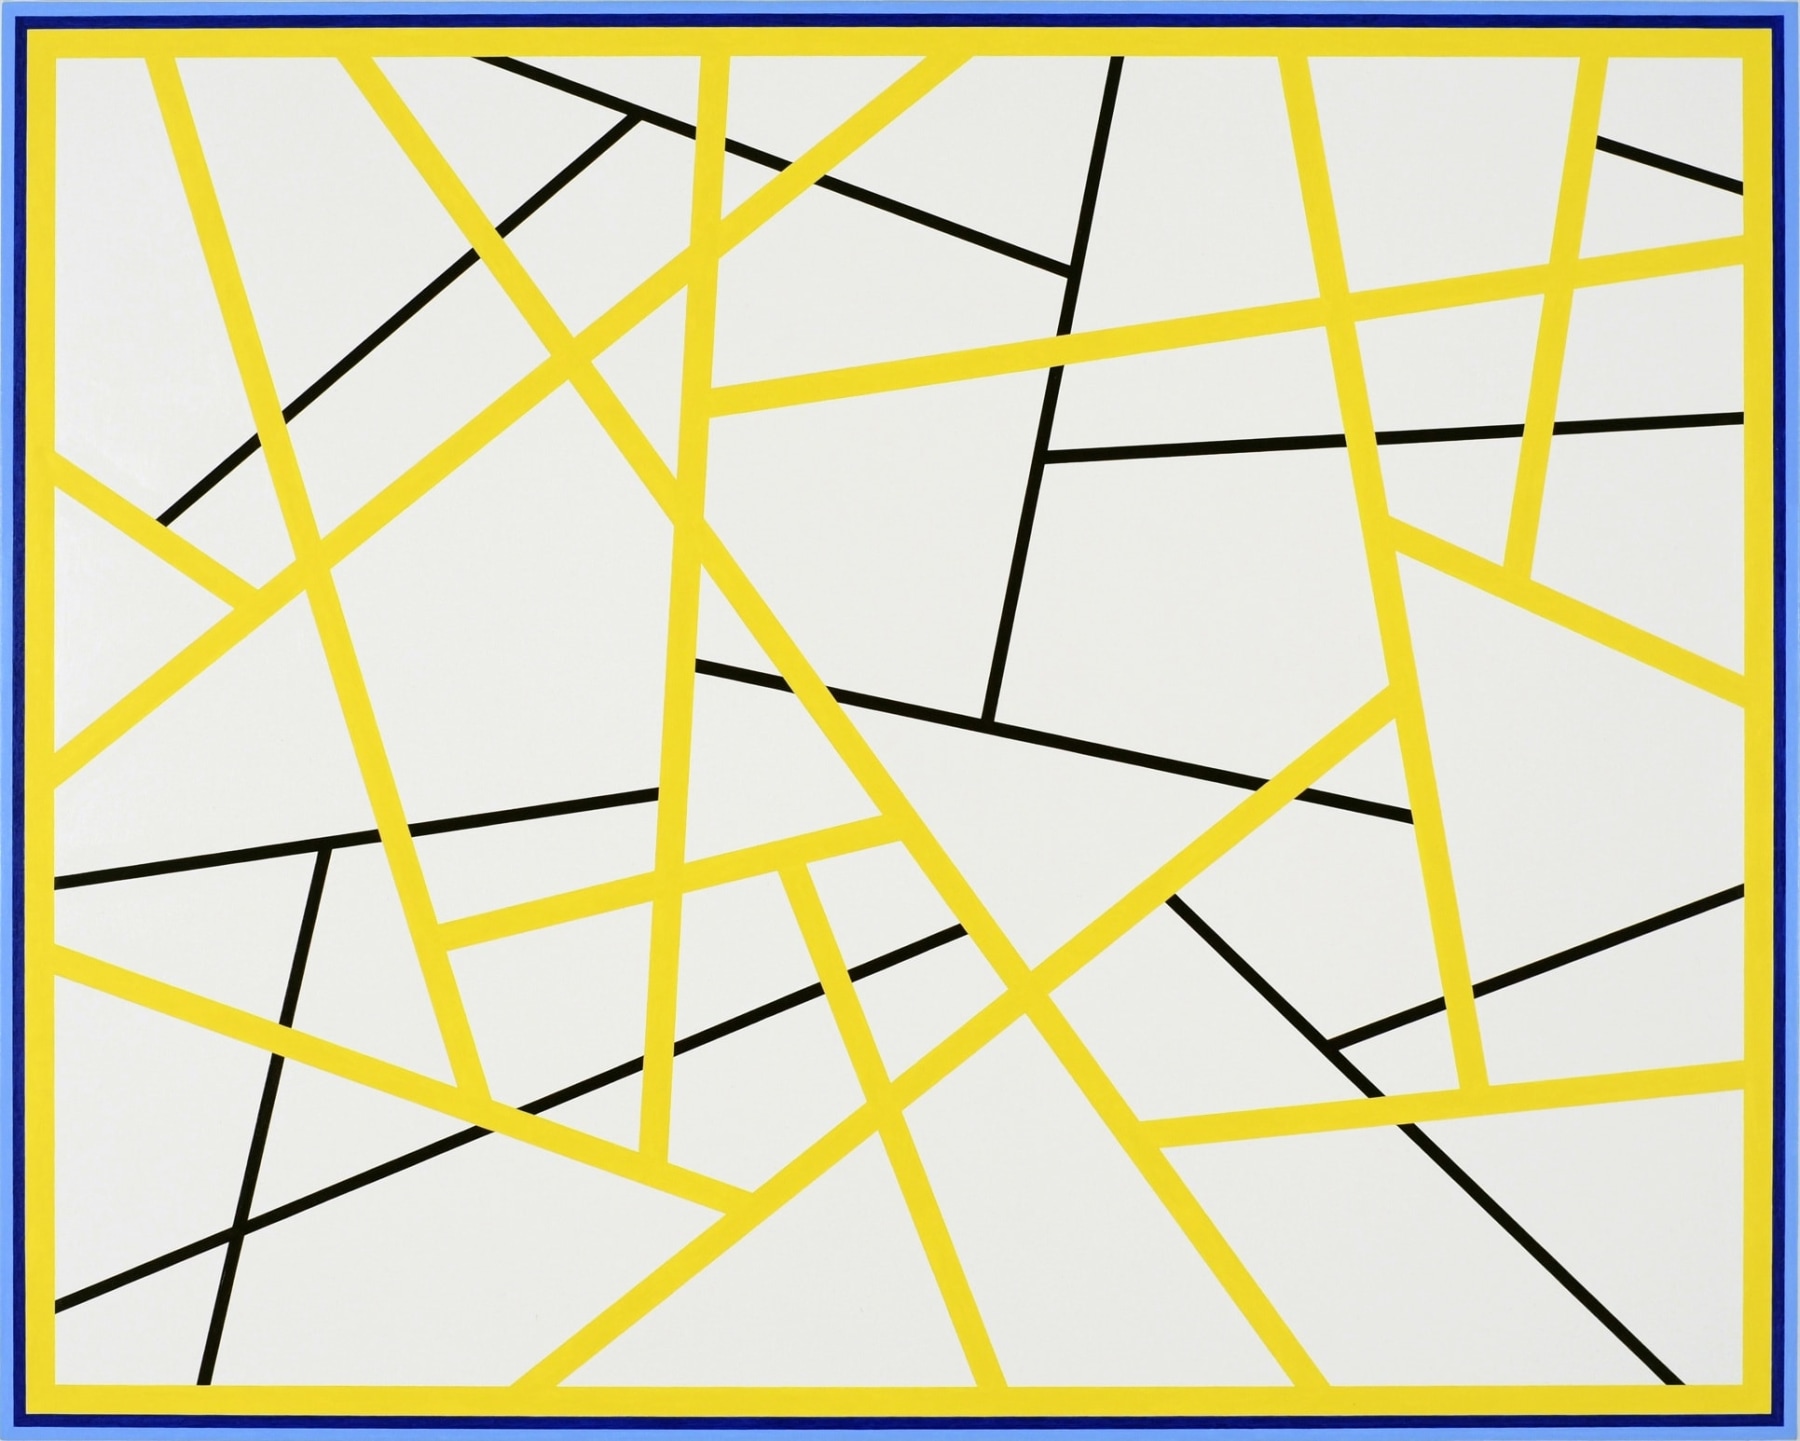 Cary Smith Straight Lines #9 (yellow-black), with blue border, 2015